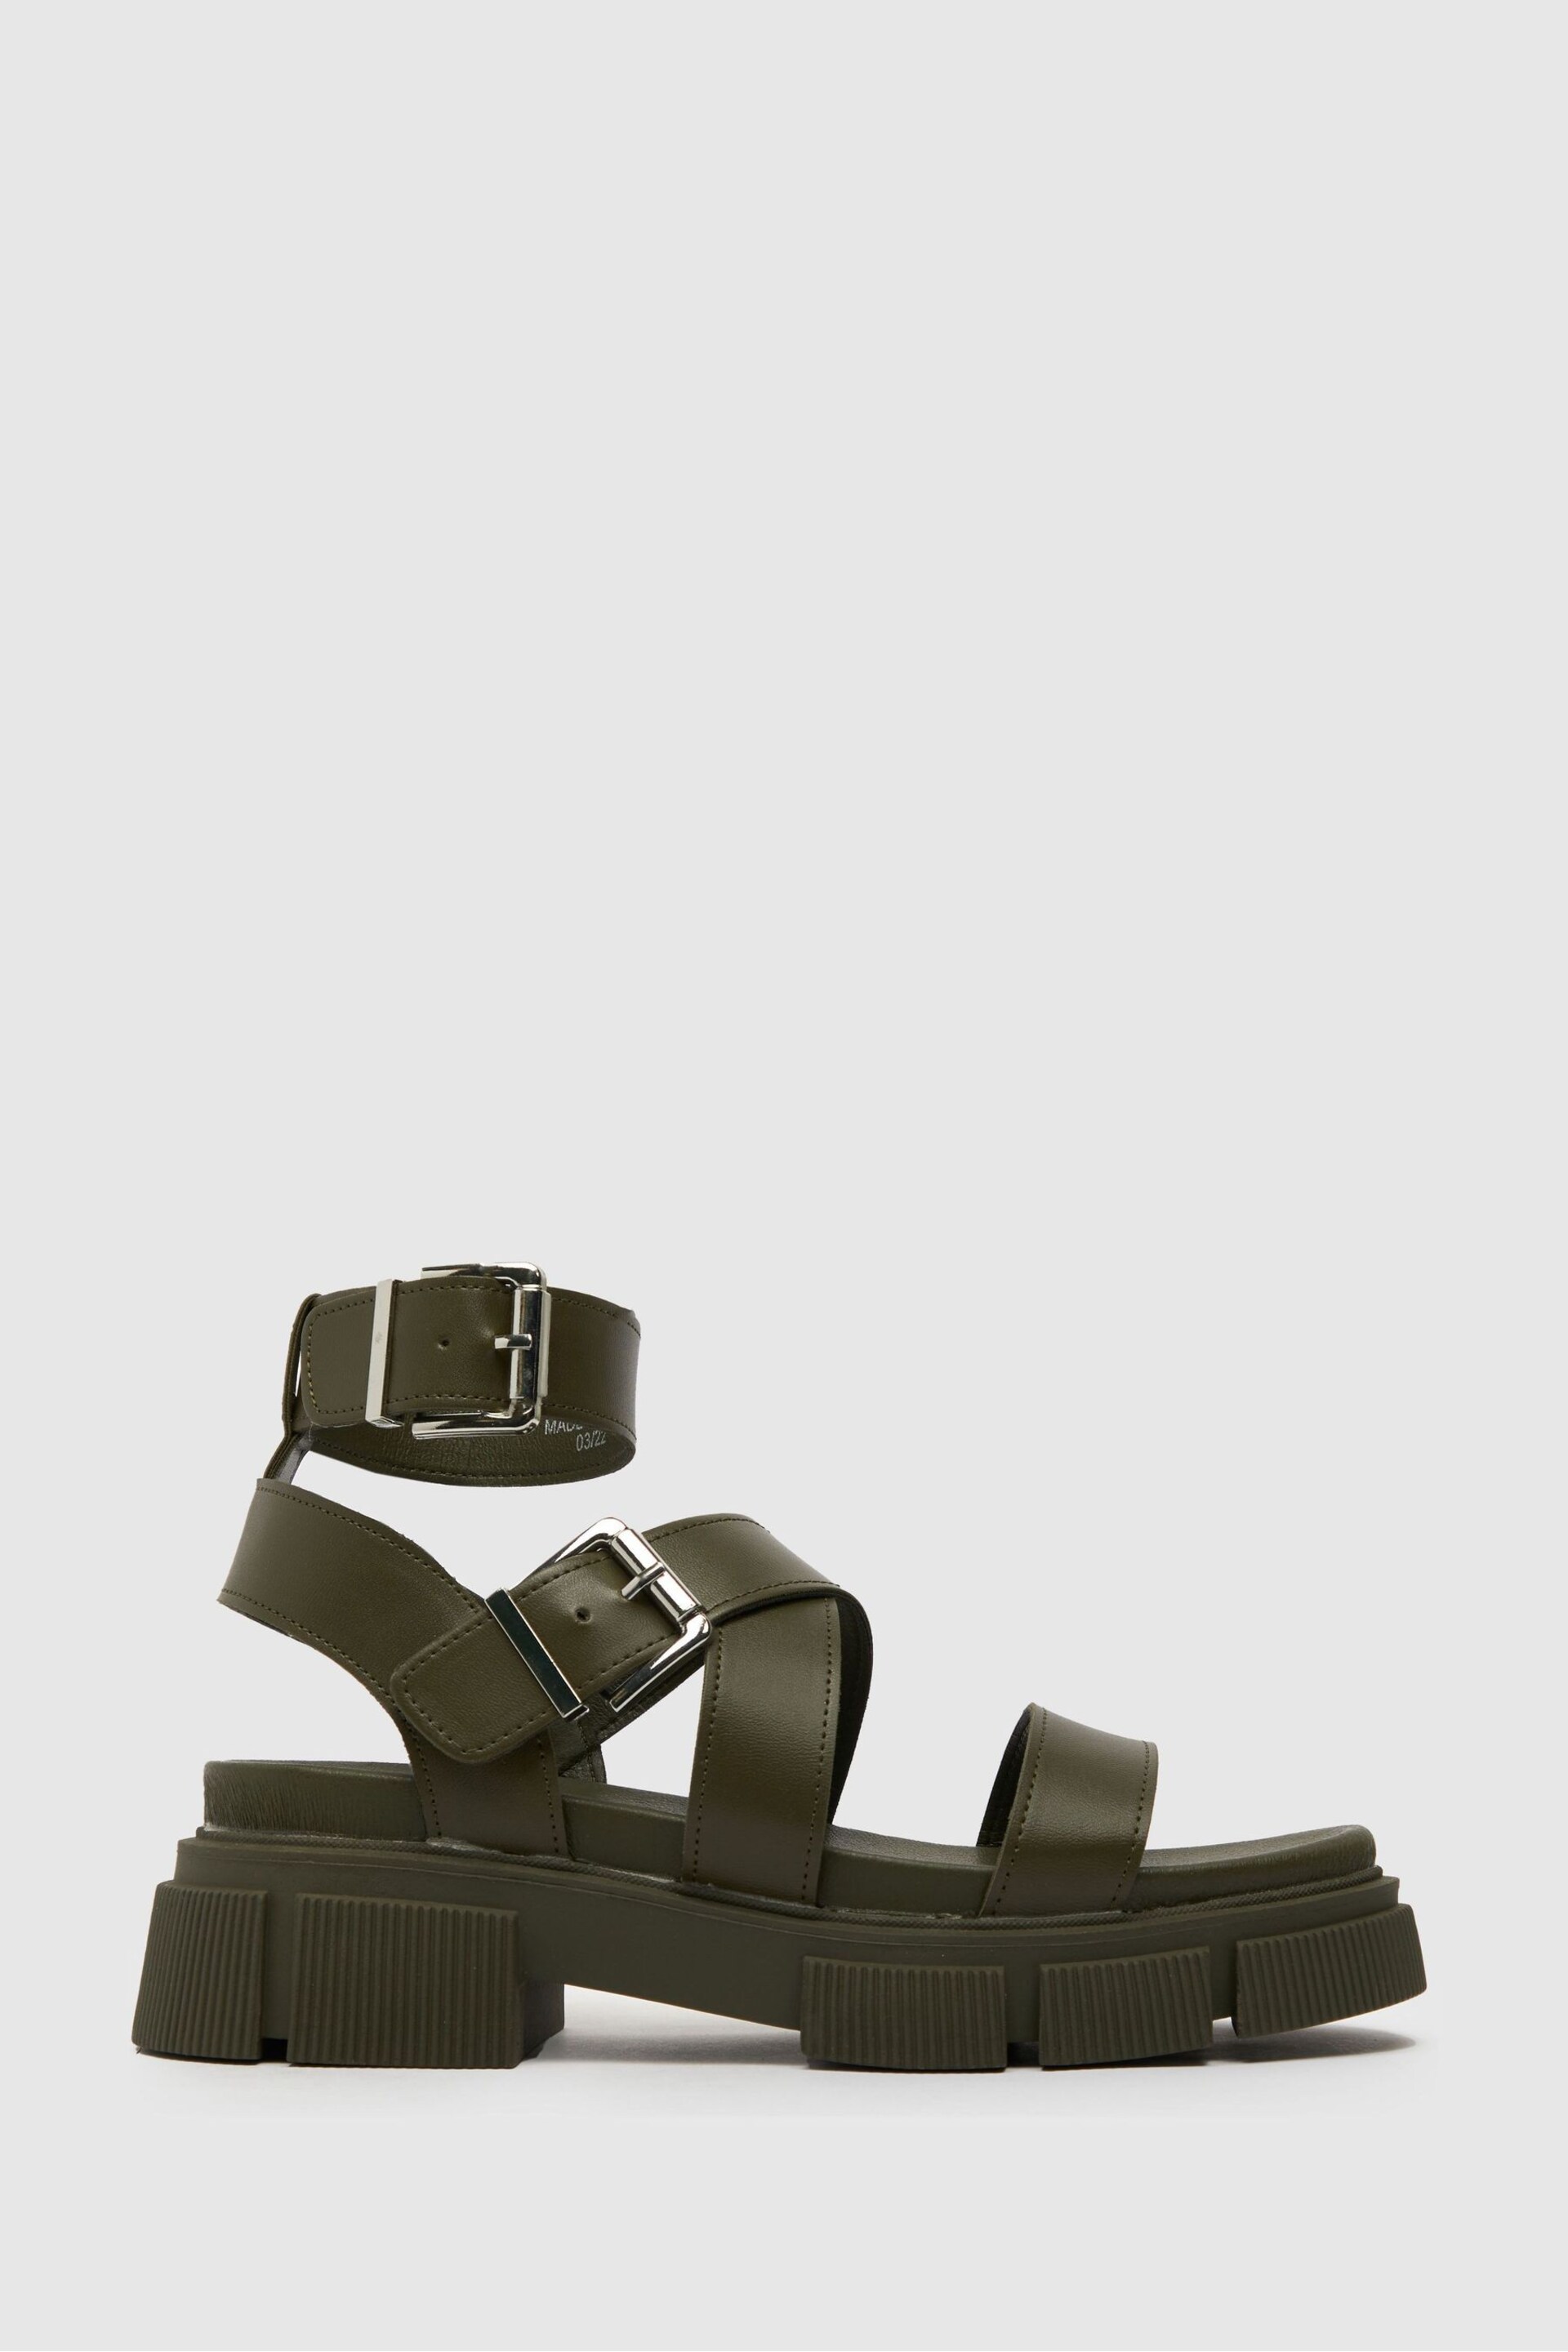 Schuh Toulouse Chunky Sandals - Image 1 of 4